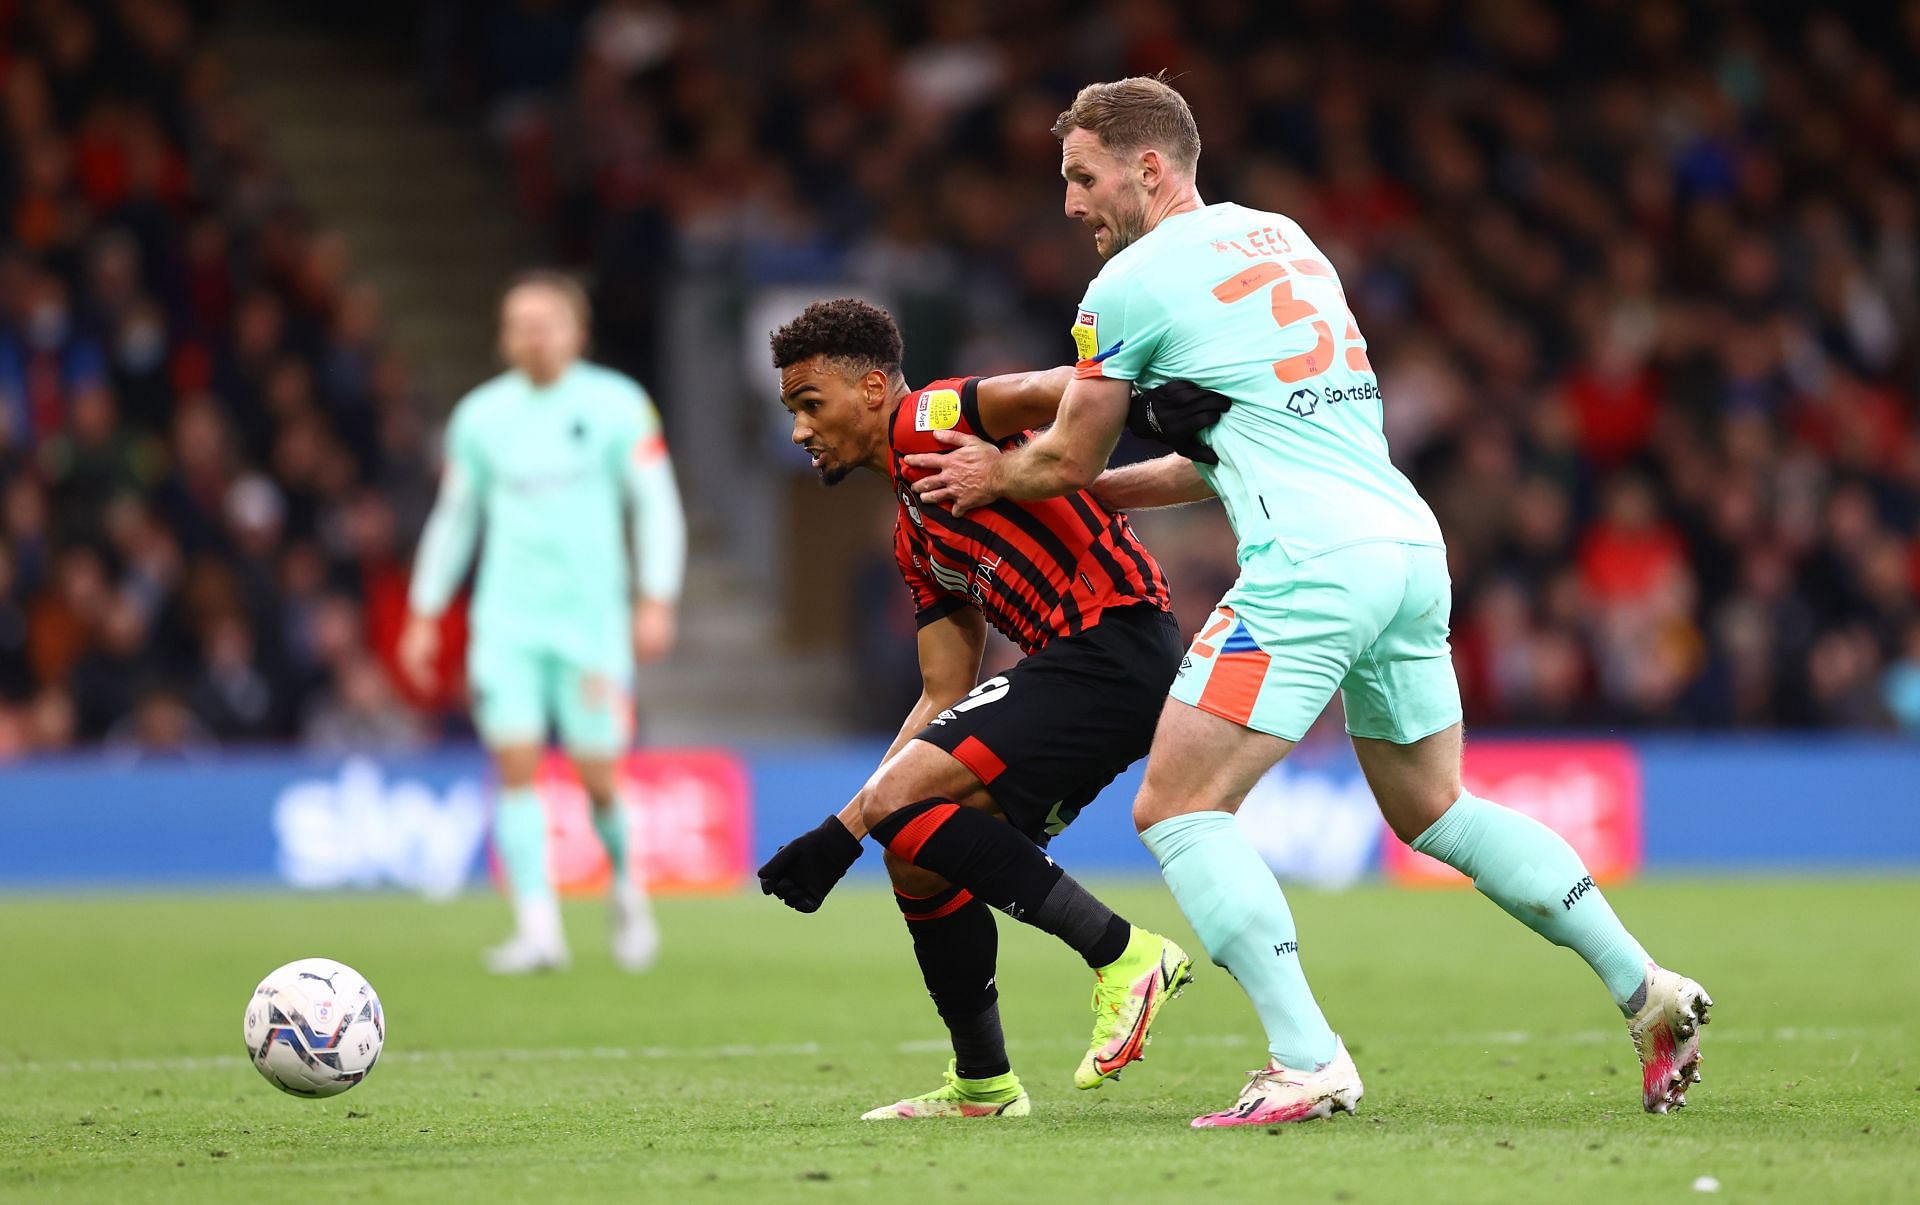 Huddersfield Town and Bournemouth lock horns on Saturday